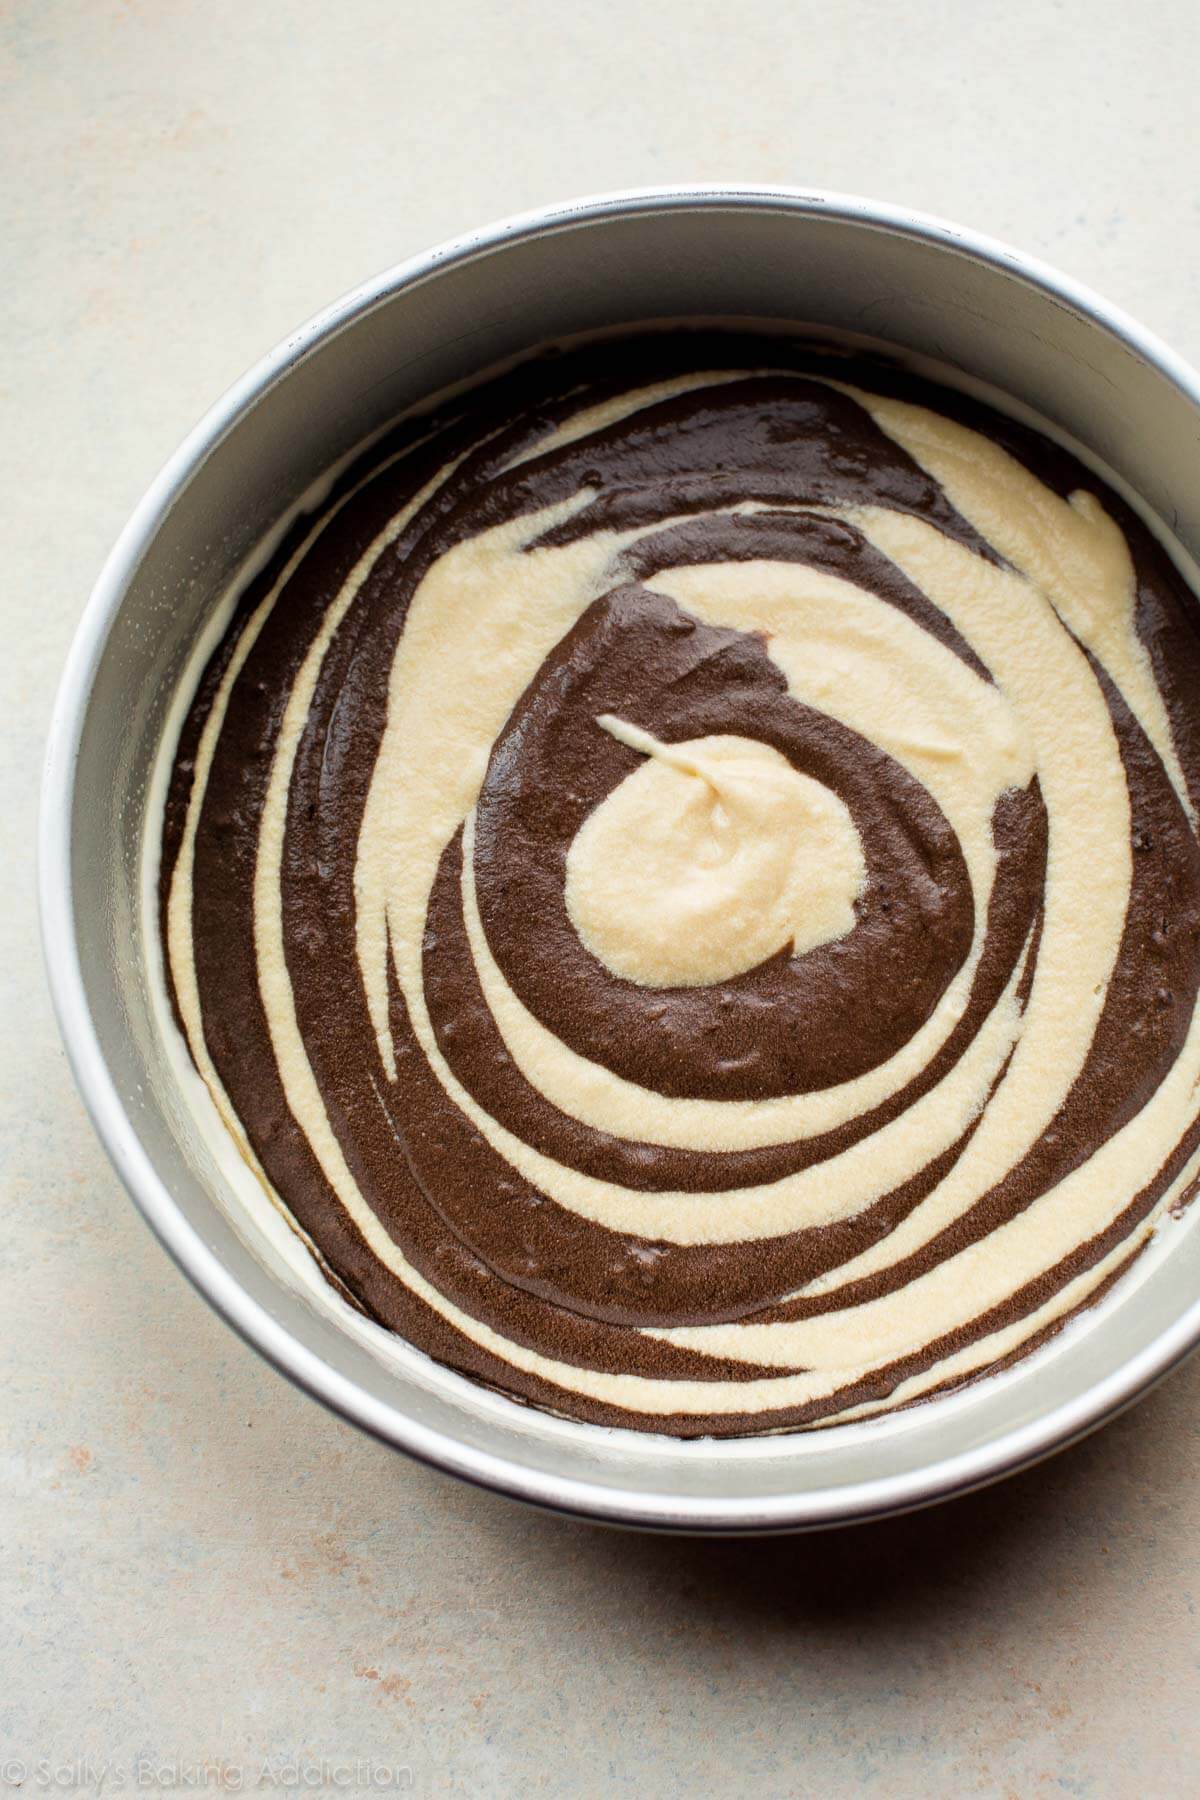 vanilla and chocolate cake batter swirled together in a cake pan before baking